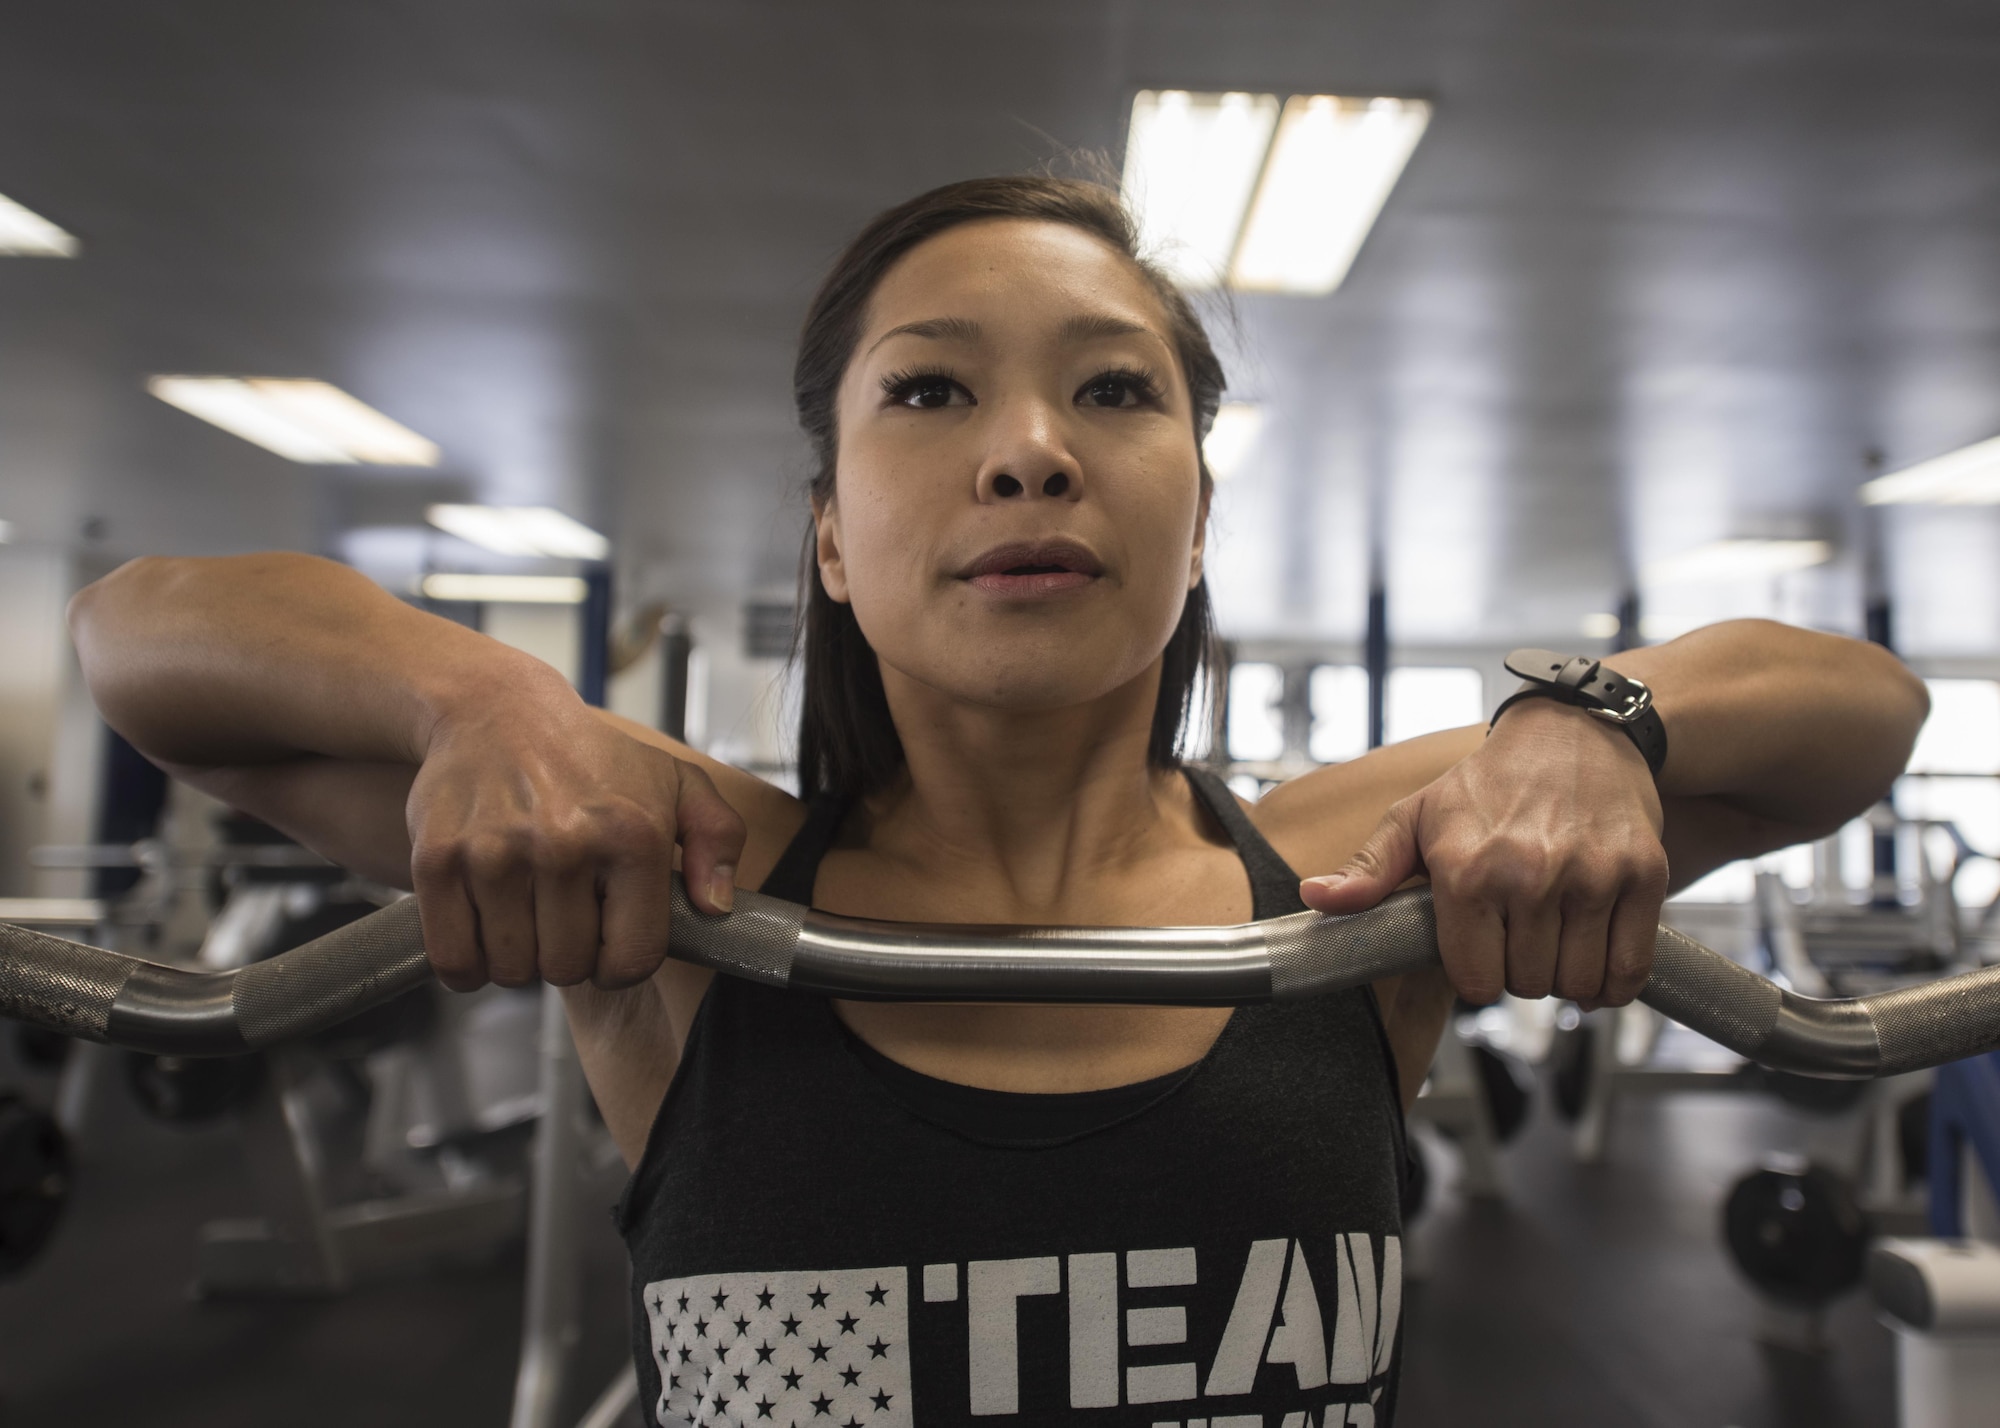 U.S. Air Force Staff. Sgt. Sheena Raya Amaya, a 35th Aerospace Medicine Squadron aerospace medical technician executes standing upright rows in the Potter Fitness Center at Misawa Air Base, Japan, Jan. 12, 2017. Amaya motivates other figure and bodybuilder competitors through fitness and is involved with non-profit veteran fitness organizations. (U.S. Air Force photo by Tech. Sgt. Araceli Alarcon)